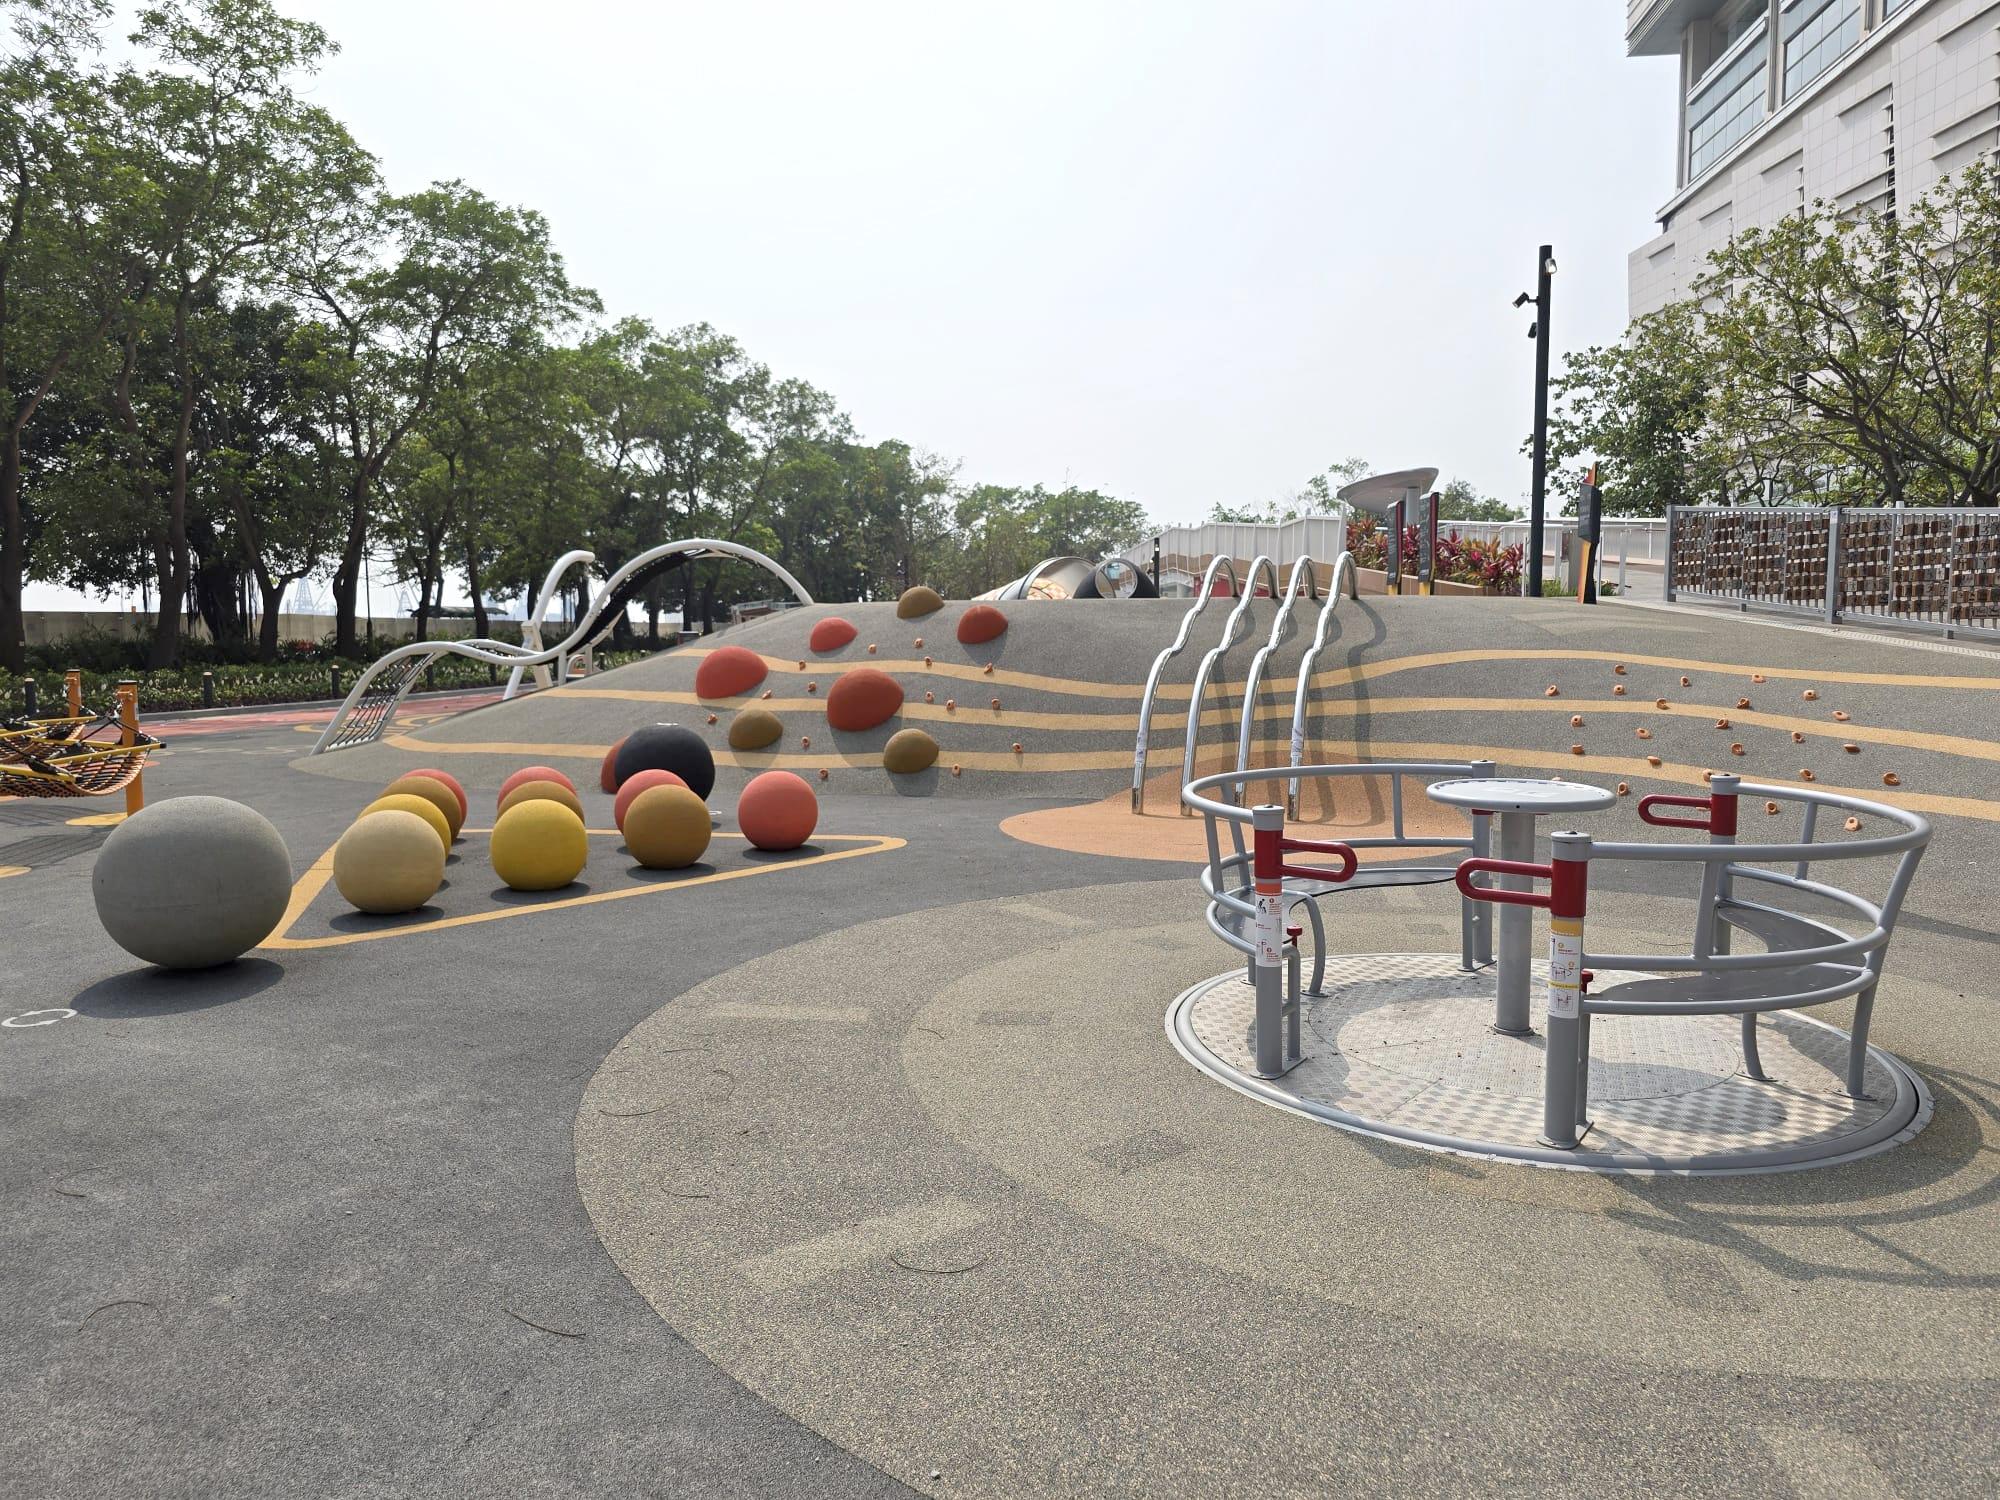 The Leisure and Cultural Services Department announced that Hoi Fai Road Park is open for public use from today (April 10). Occupying an area of about 9 500 square metres, the park provides a variety of recreational facilities. Photo shows an inclusive children's playground.



